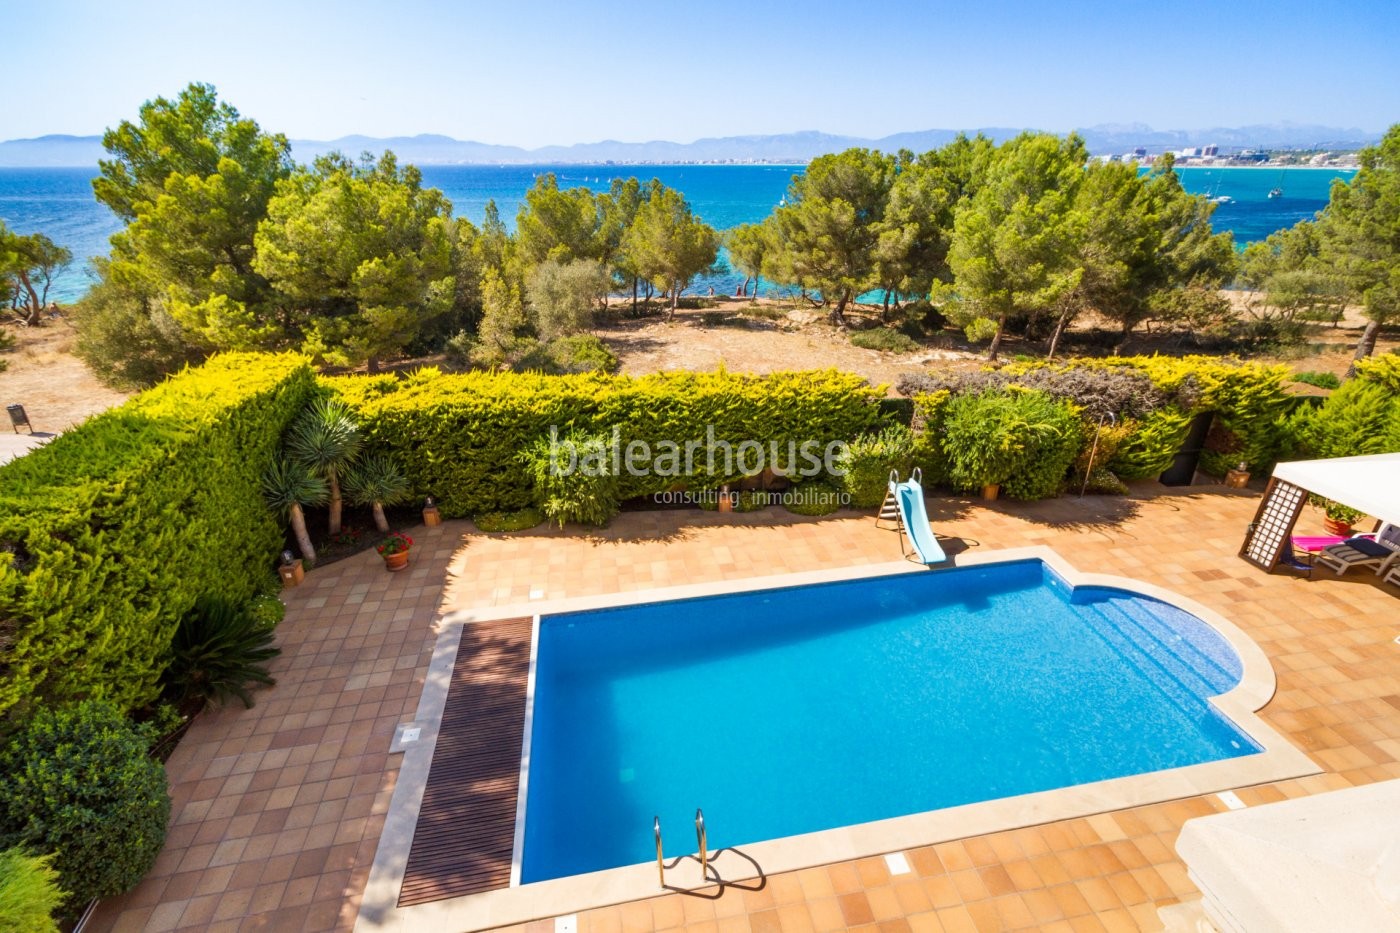 Start your day always with the sound of waves in this luxury sea frontline villa